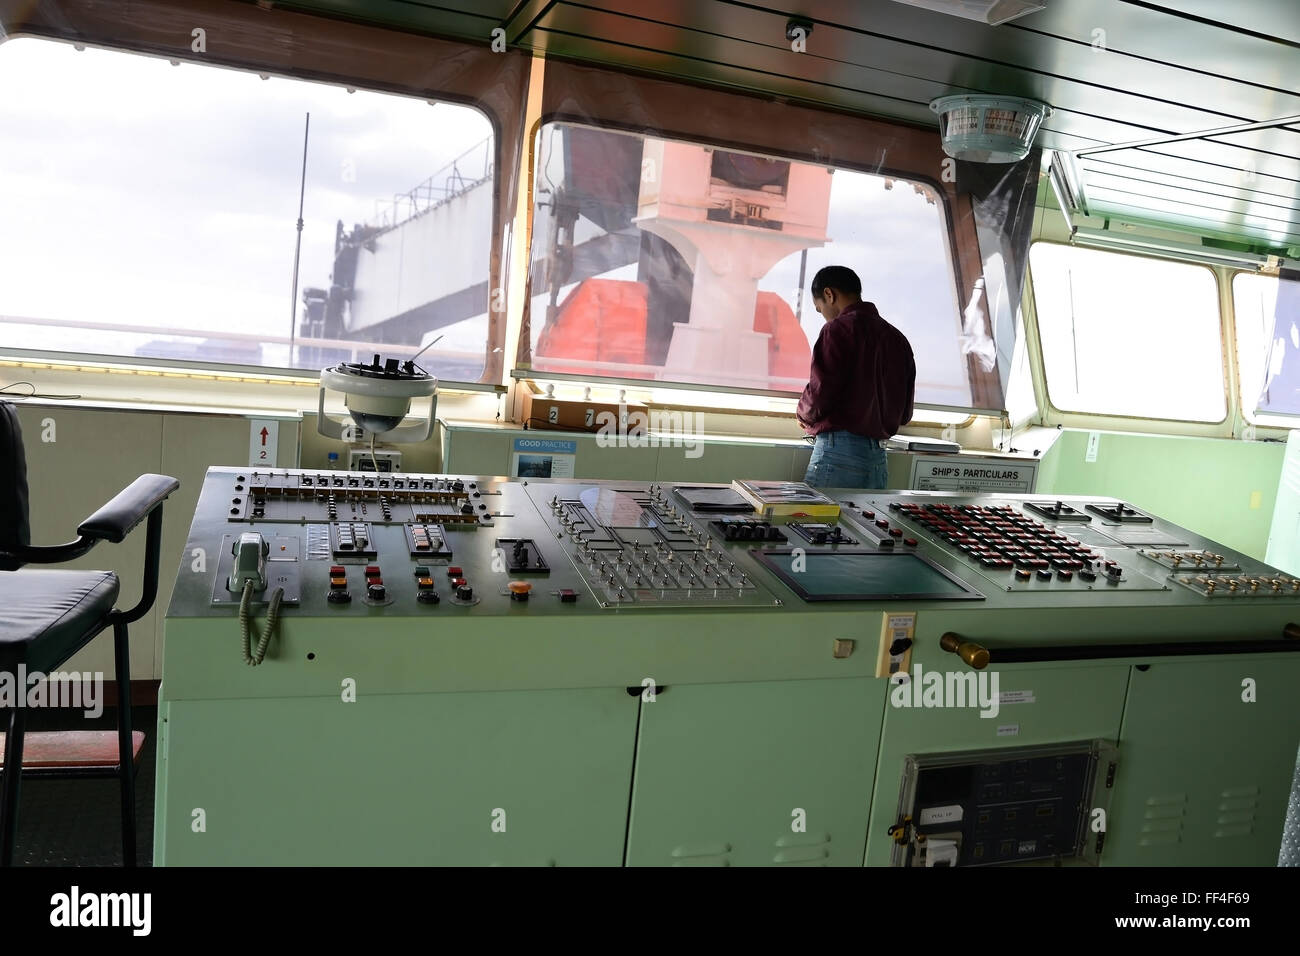 Interior Of The Bridge Control Center Of The Ship On Container Ship FF4F69 